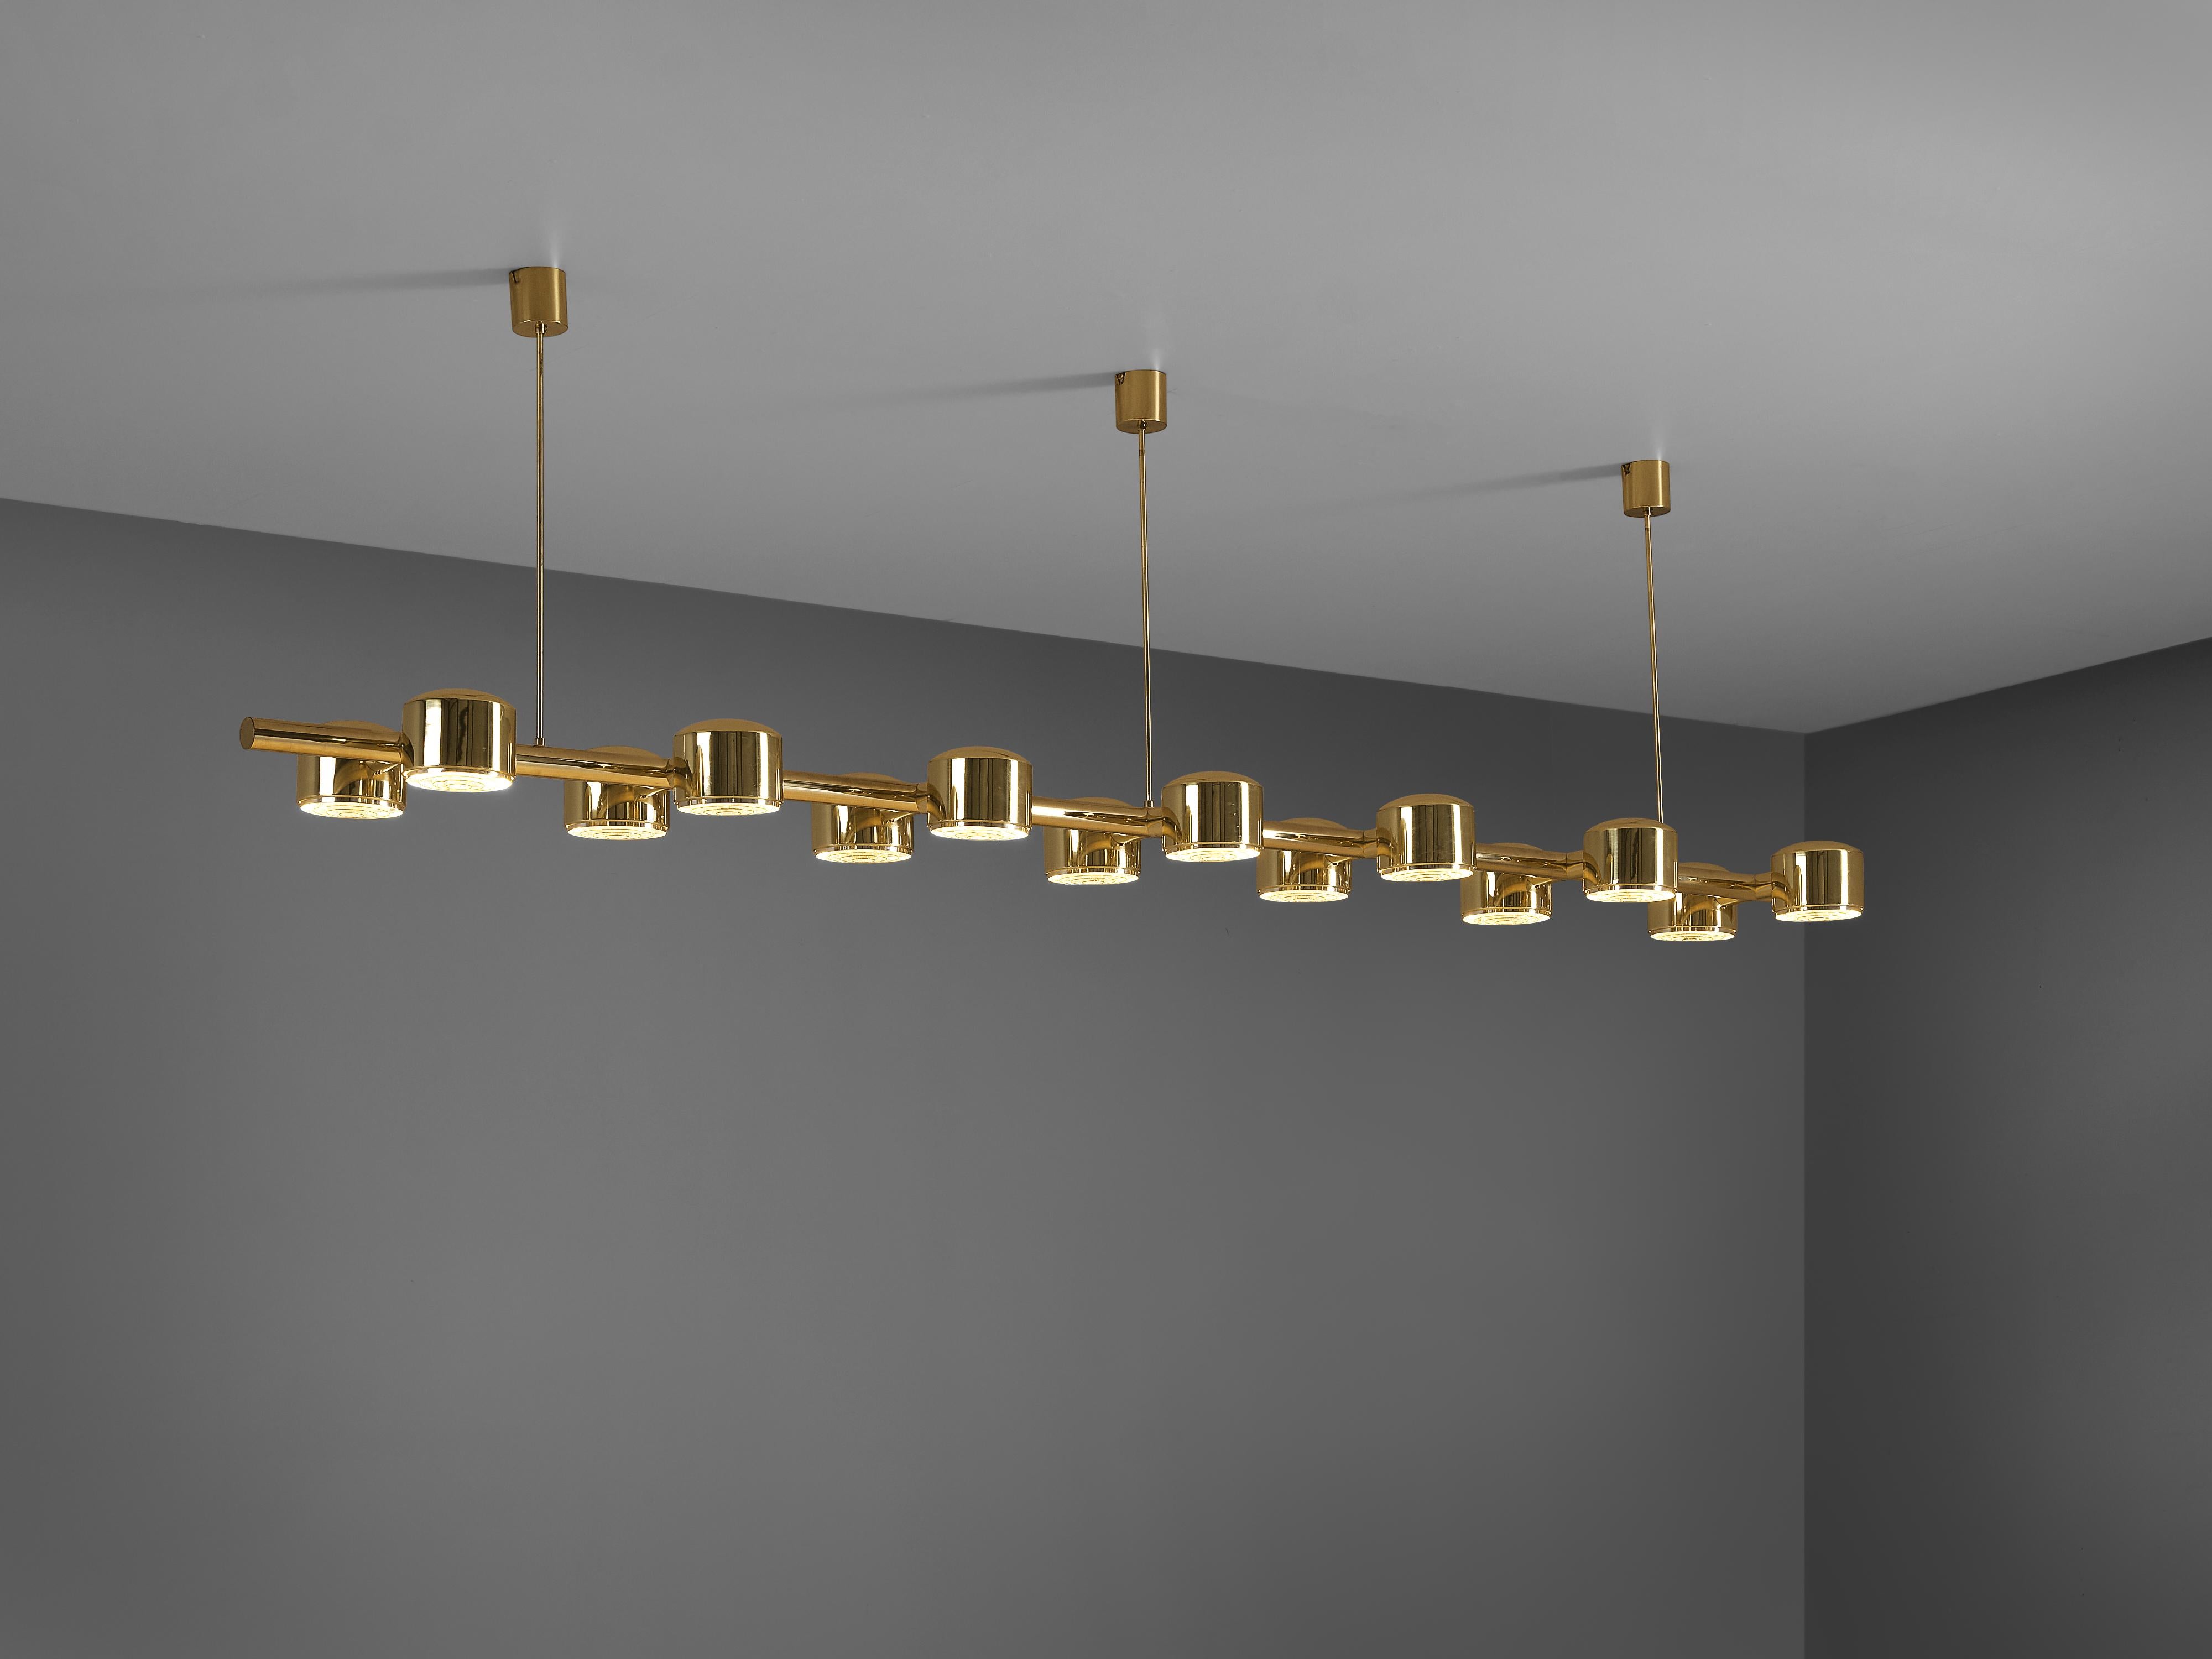 Hans-Agne Jakobsson for Markaryd, ceiling light, model T 746/14, Sweden, 1960s

Hans-Agne Jakobsson designed this large chandelier with fourteen cylindrical lightbulbs paired on a line. The brass reflects the light vertically whilst the light itself